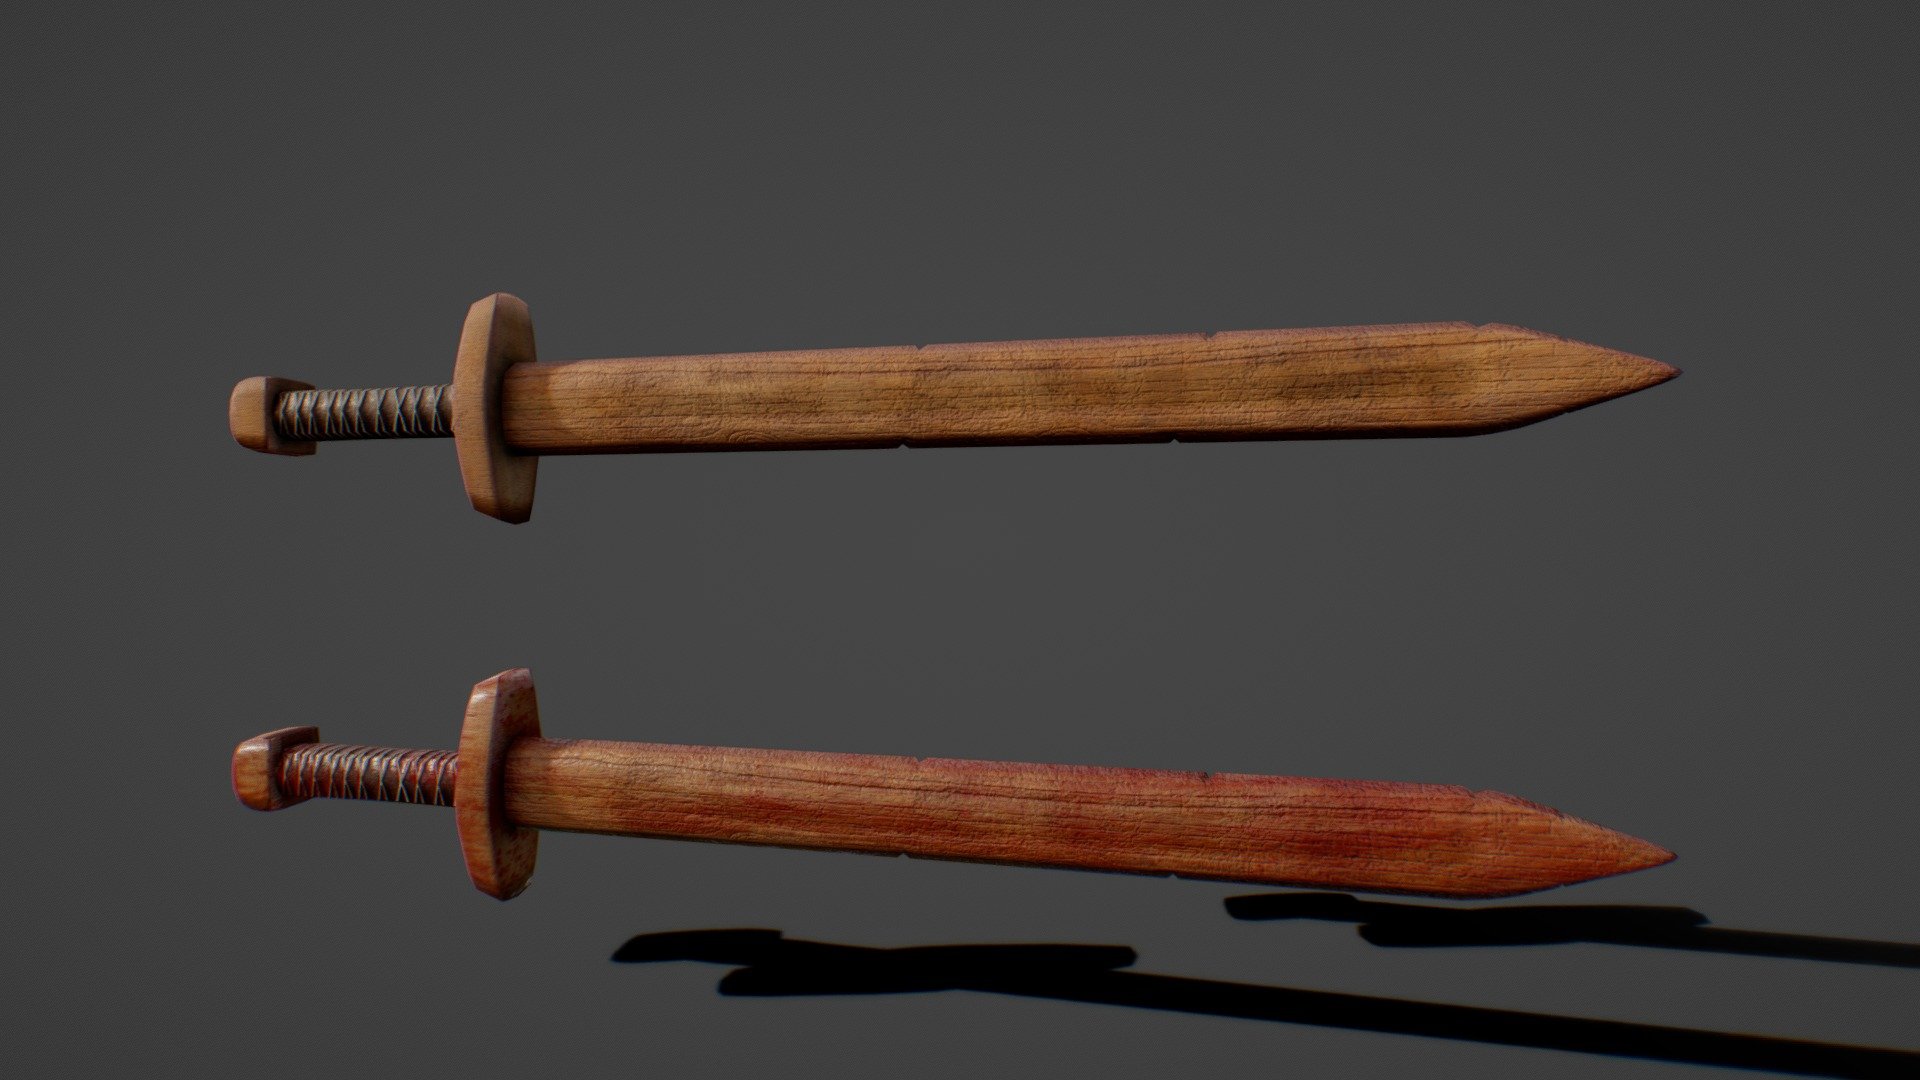 TIS BUT A SCRATCH!
Hear ye, hear ye&hellip; 
To prove thine mettel, here are 2 blades made of tree.
Two versions of the same sword.
One clean and the other covered in blood for use in any and all of your projects. 
Modeled in Blender 2.9 Textured in Substance Painter and Marmoset Toolbag 3

Optimized geometry of games and animation.
textures are 4k and Fully PBR tested.
Includes FBX file and 14 PNG textures - Wooden Sword (with Blood Version) - Buy Royalty Free 3D model by Isaack - Tacko The 3D Guy (@isaackgamma) 3d model